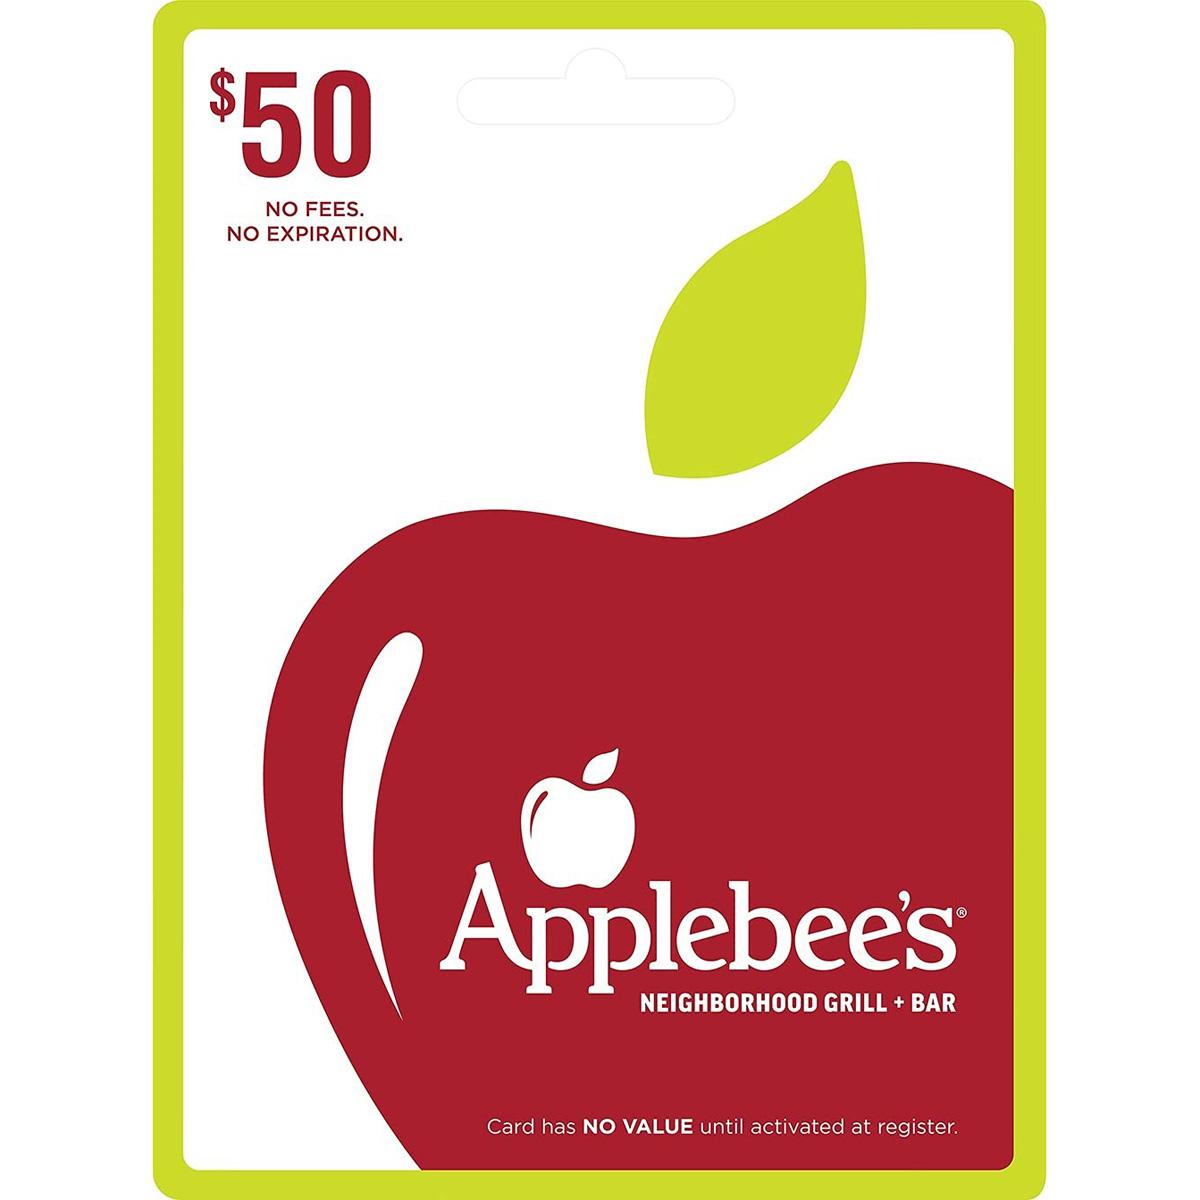 $50 Applebees Discounted Gift Card for $39.50